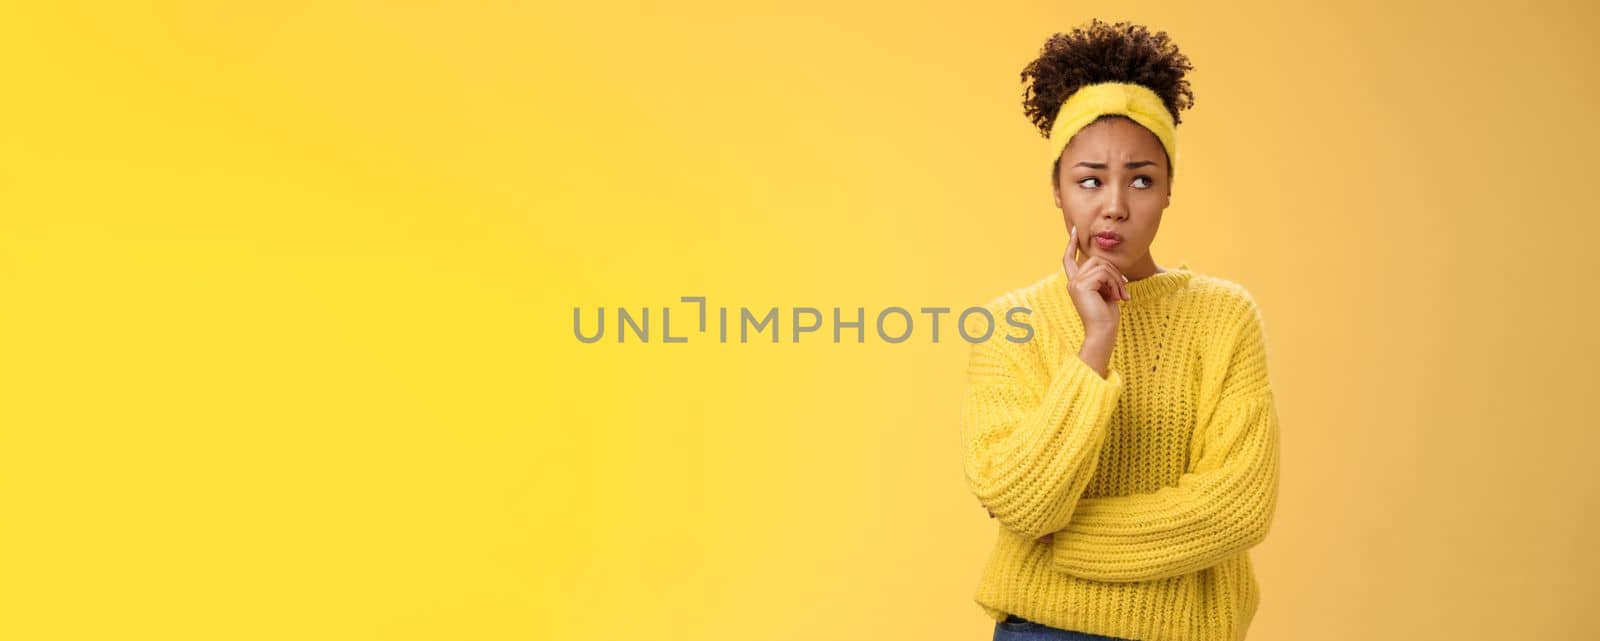 Perplexed unsure cute timid african-american female thinking how escape awkward situation smirking frowning concerned touch cheek thoughtful thinking nervously, worried yellow background.